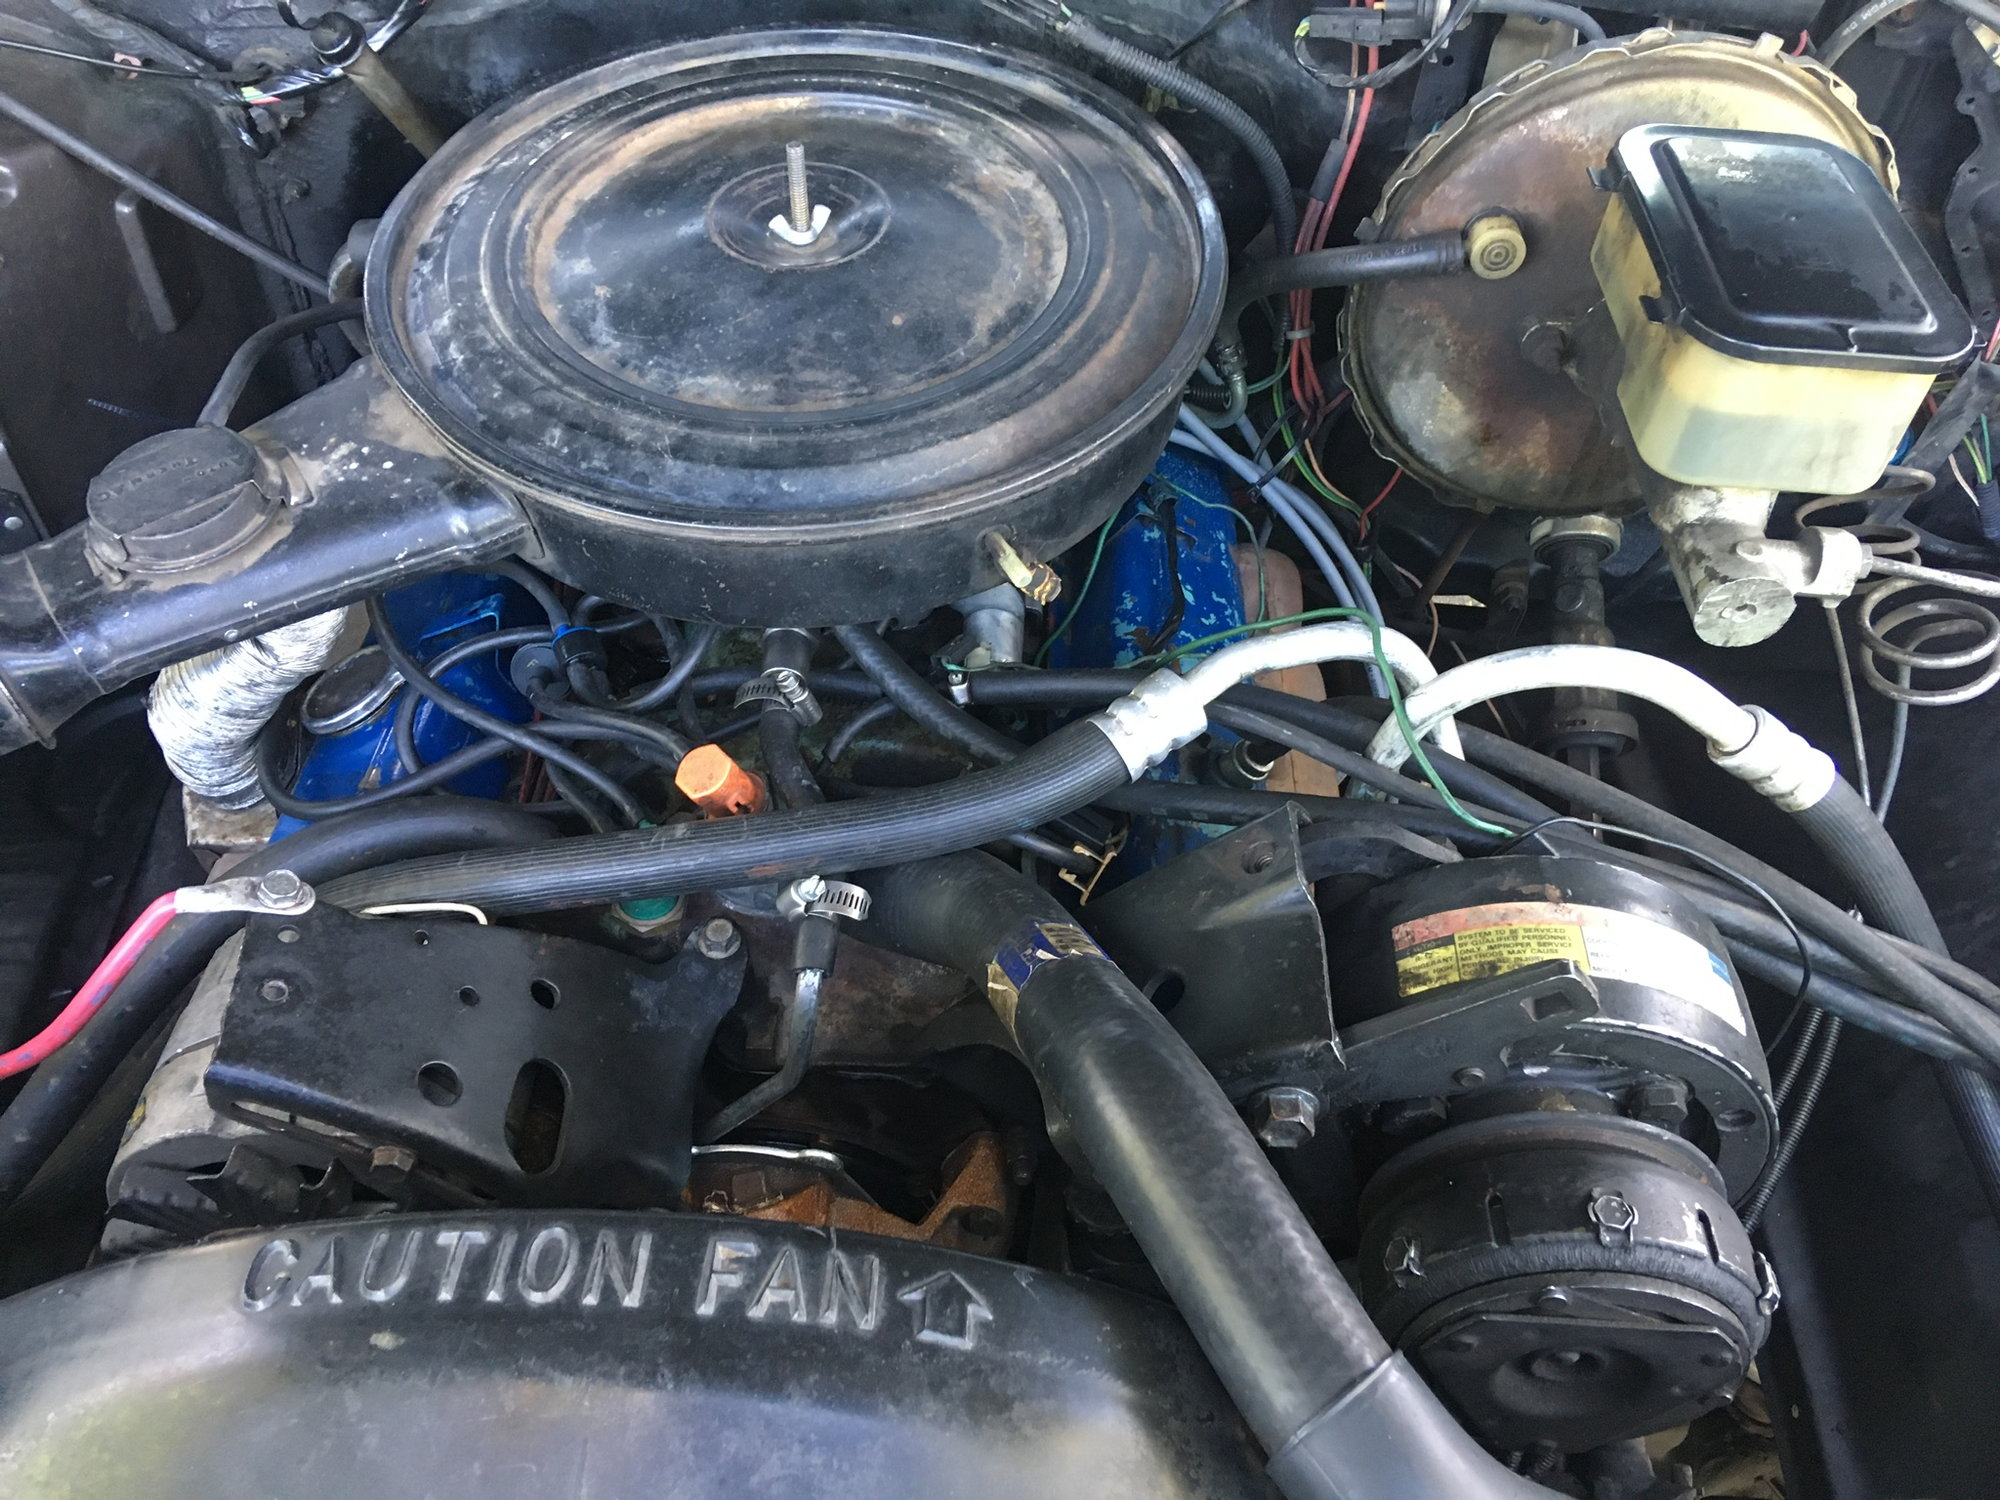 305 To 350 Swap Need Help With Connections Any Tips Or Guidance Chevrolet Forum Chevy Enthusiasts Forums